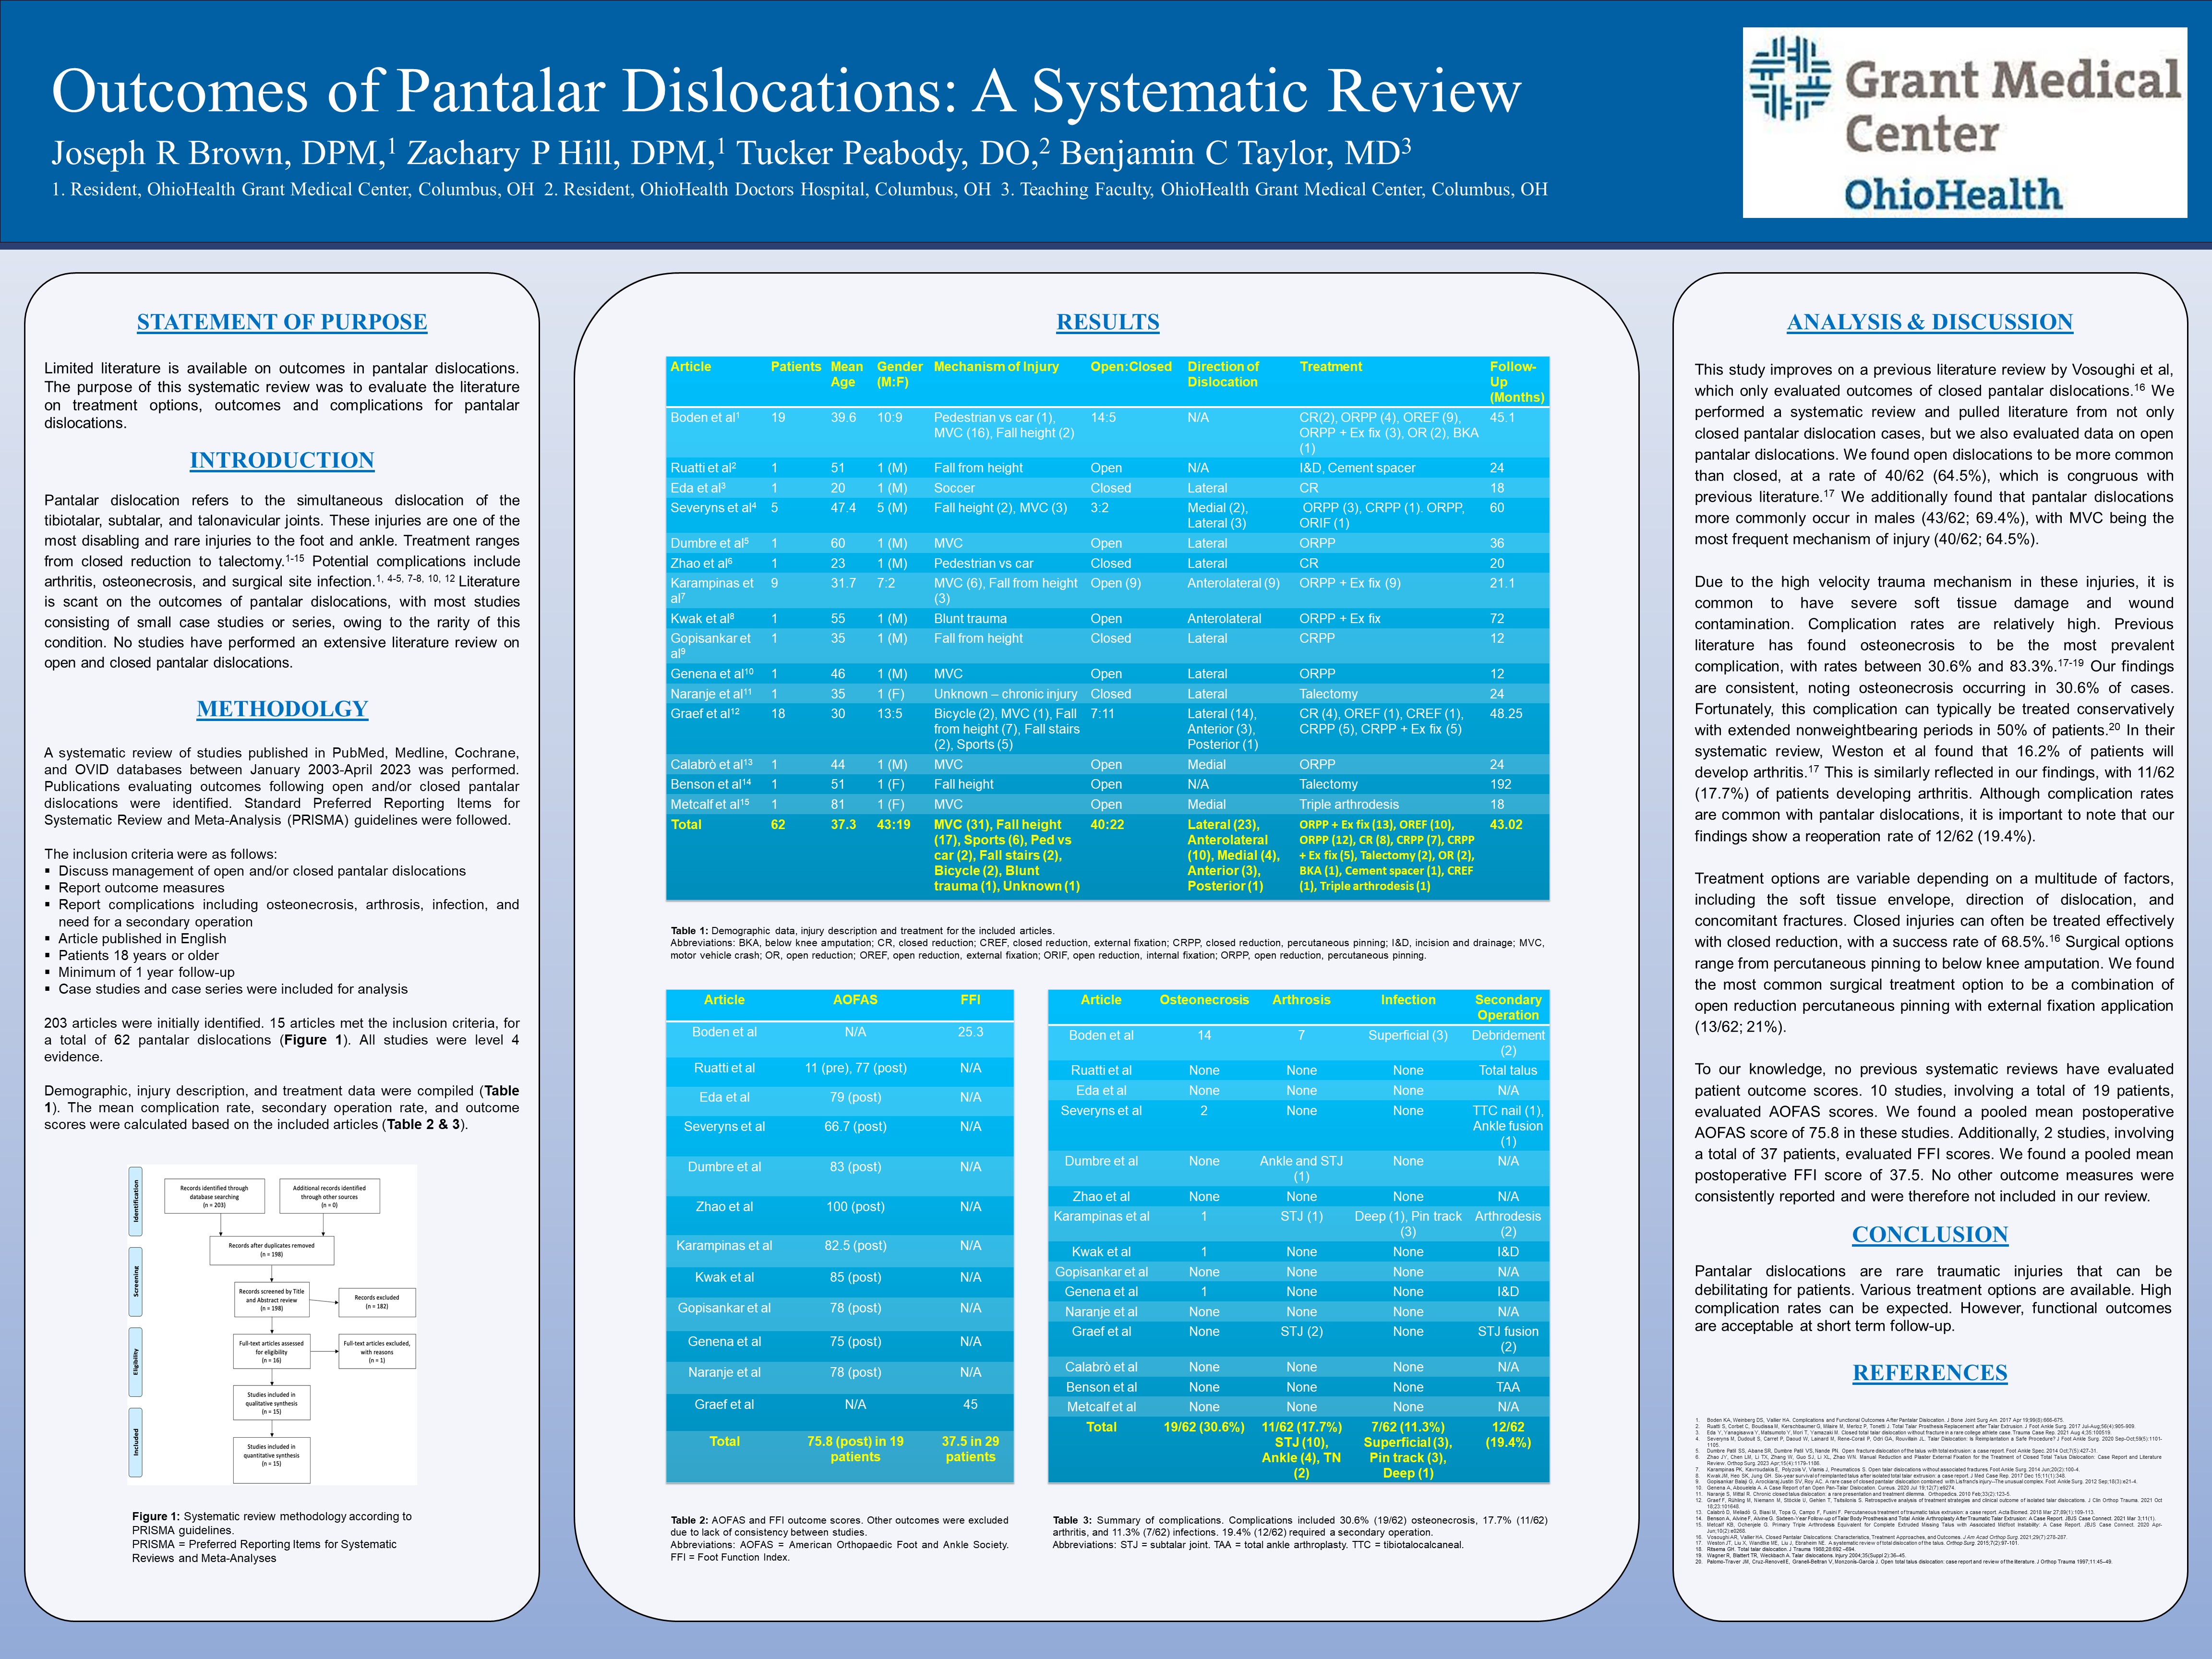 Outcomes of Pantalar Dislocations: A Systematic Review